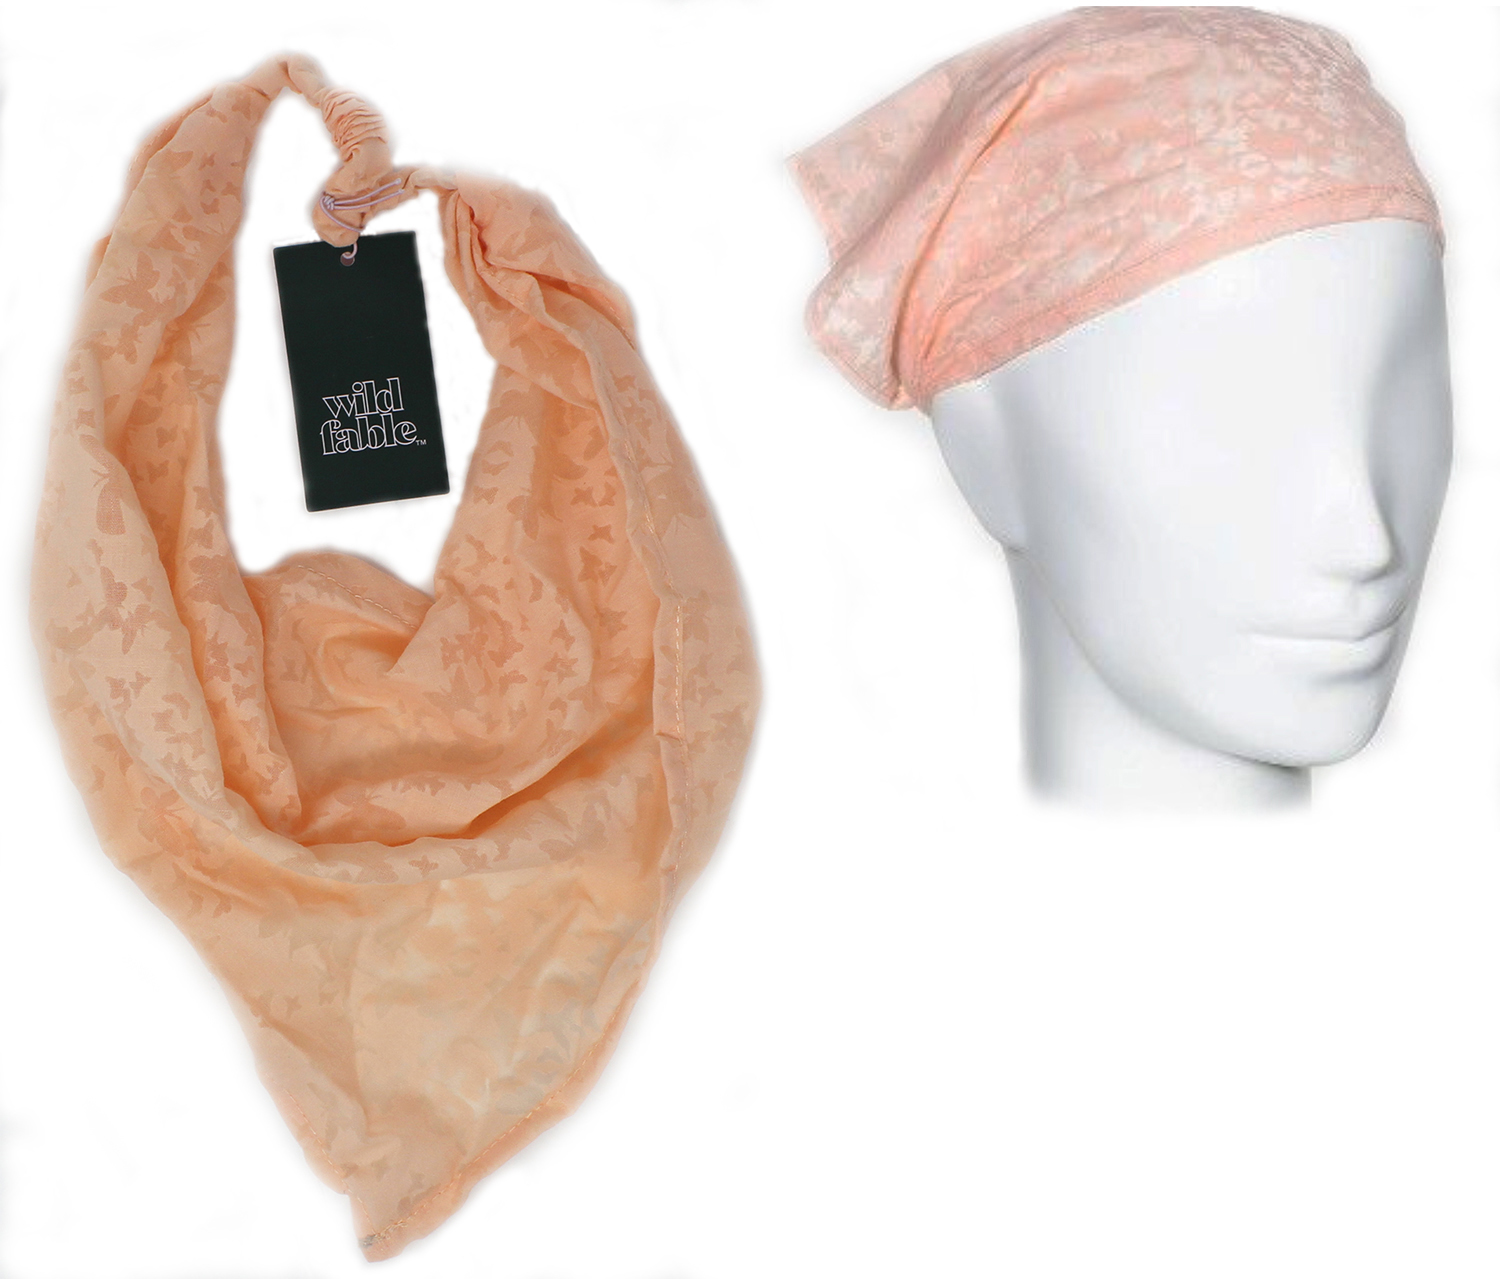 Butterfly Print Headscarf - Wild Fable Pastel Peach. Pre-priced $8.00